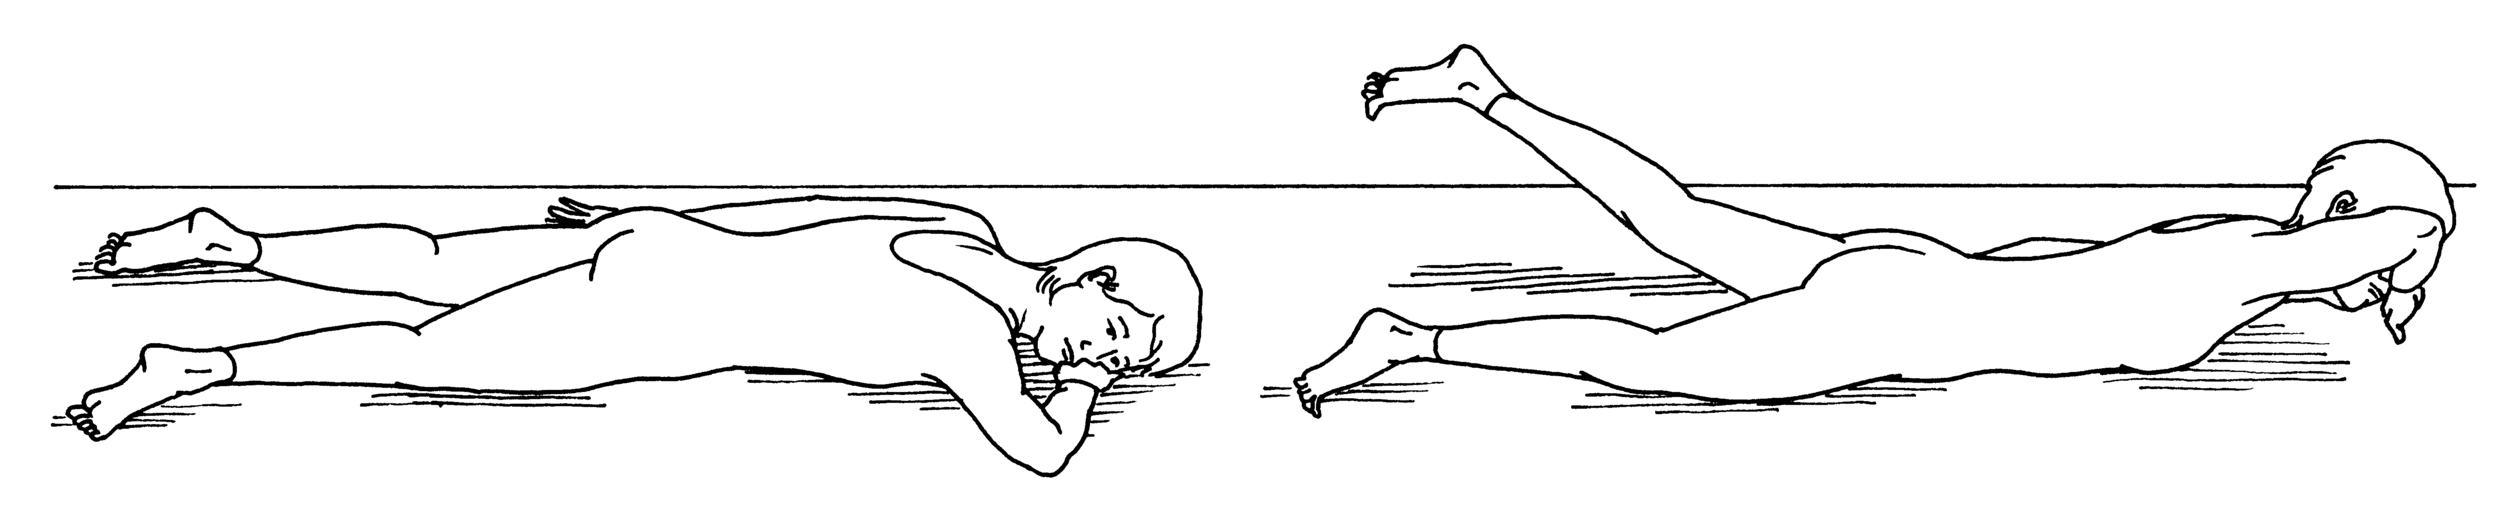 6.reverse sit up right side.jpg